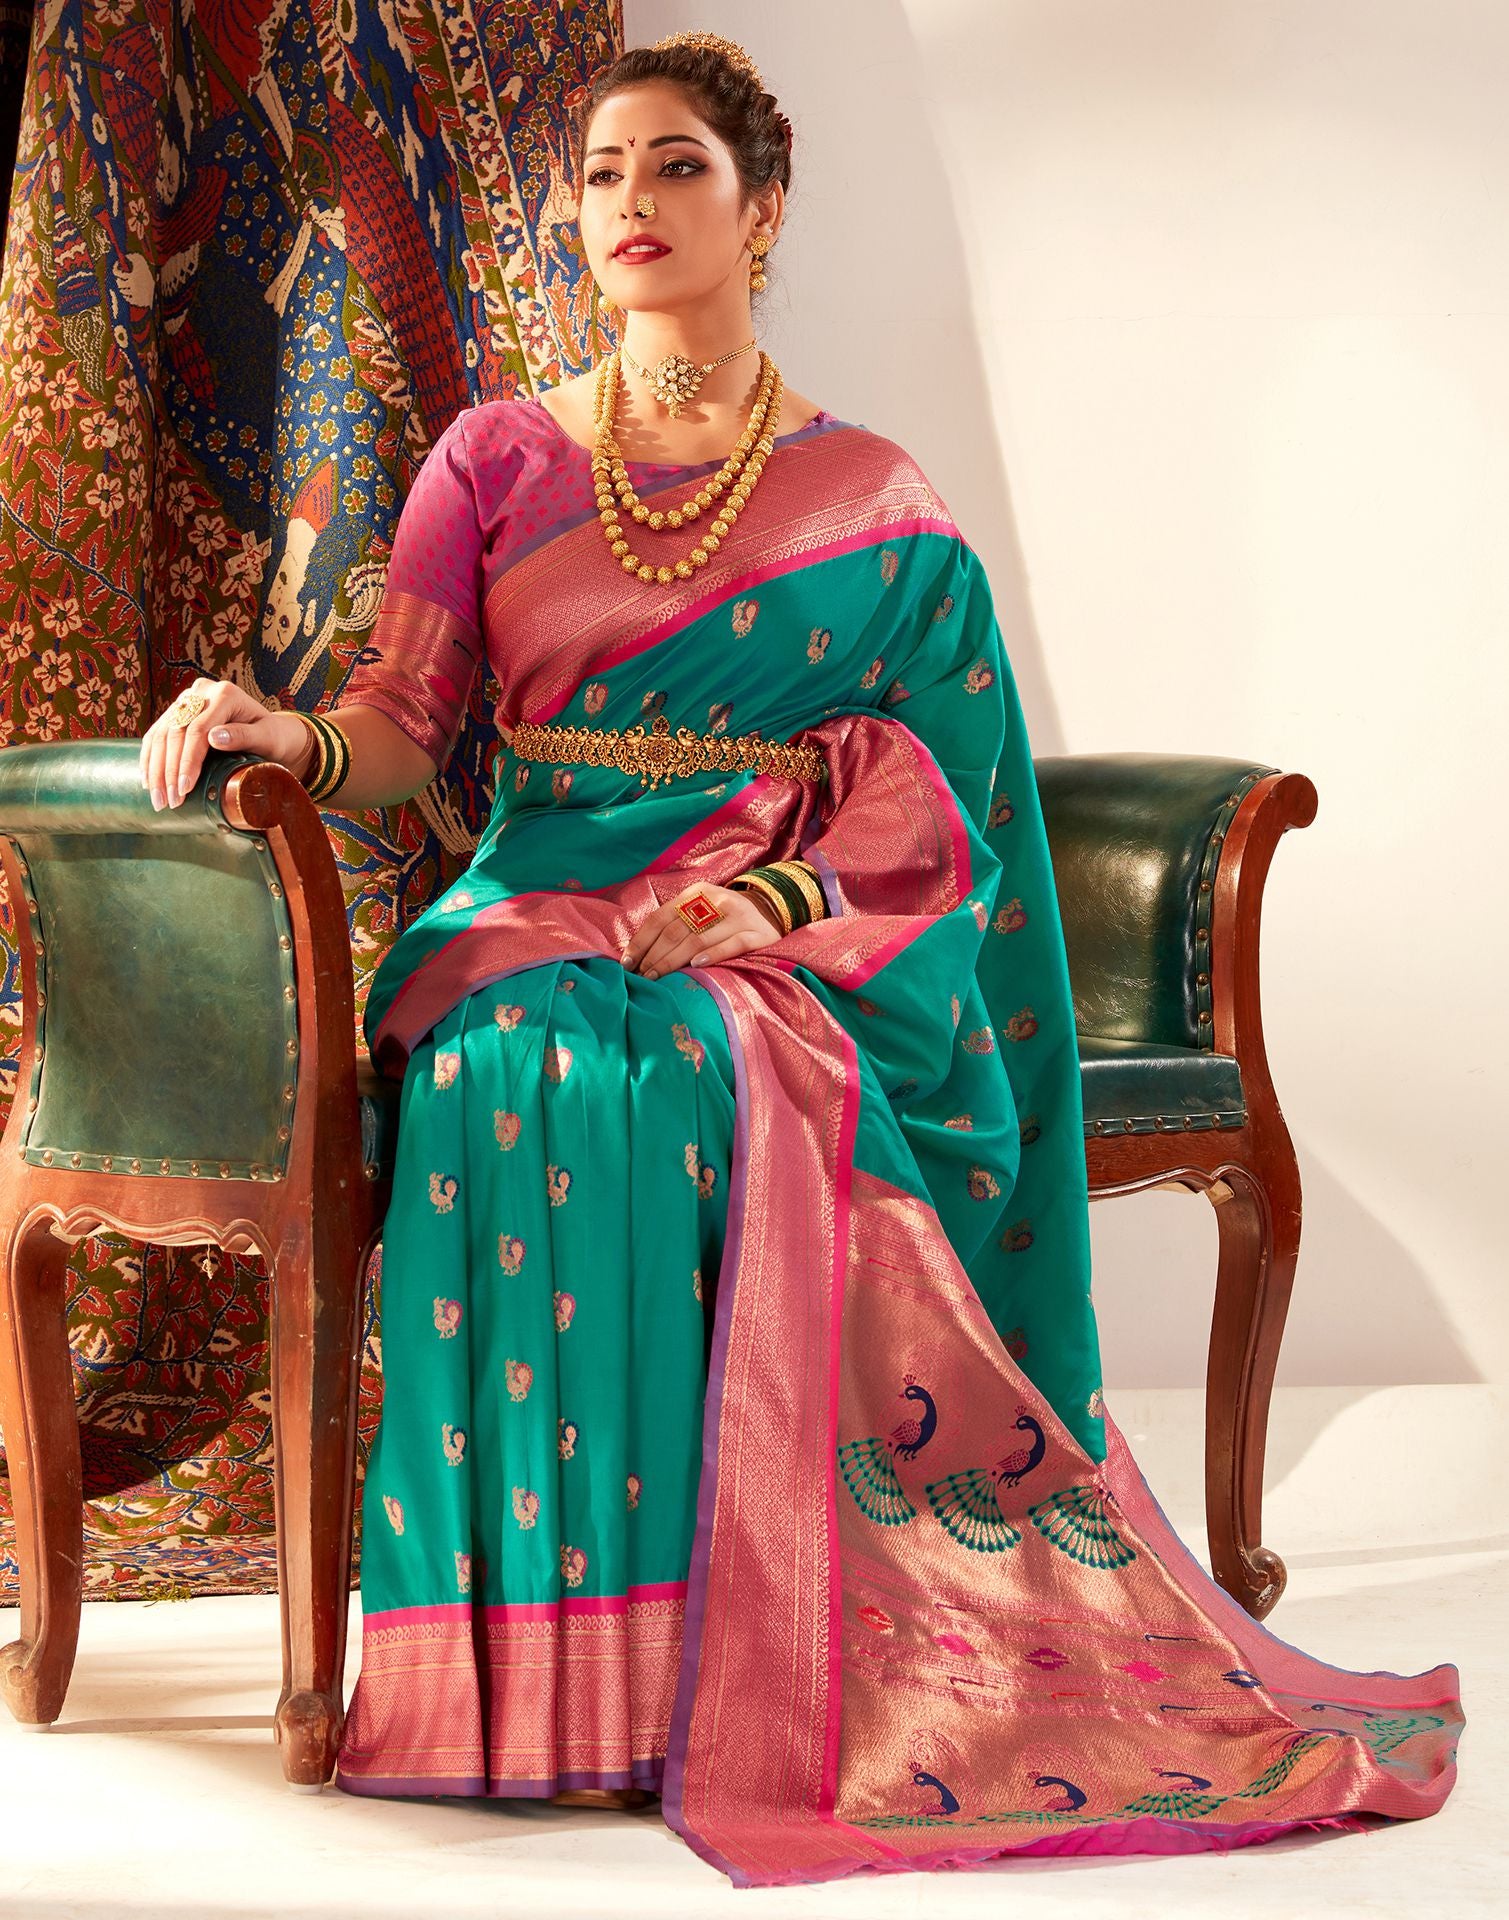 Paithani Saree in Thoughts? Look at this Tamil Ponnu's elegance...